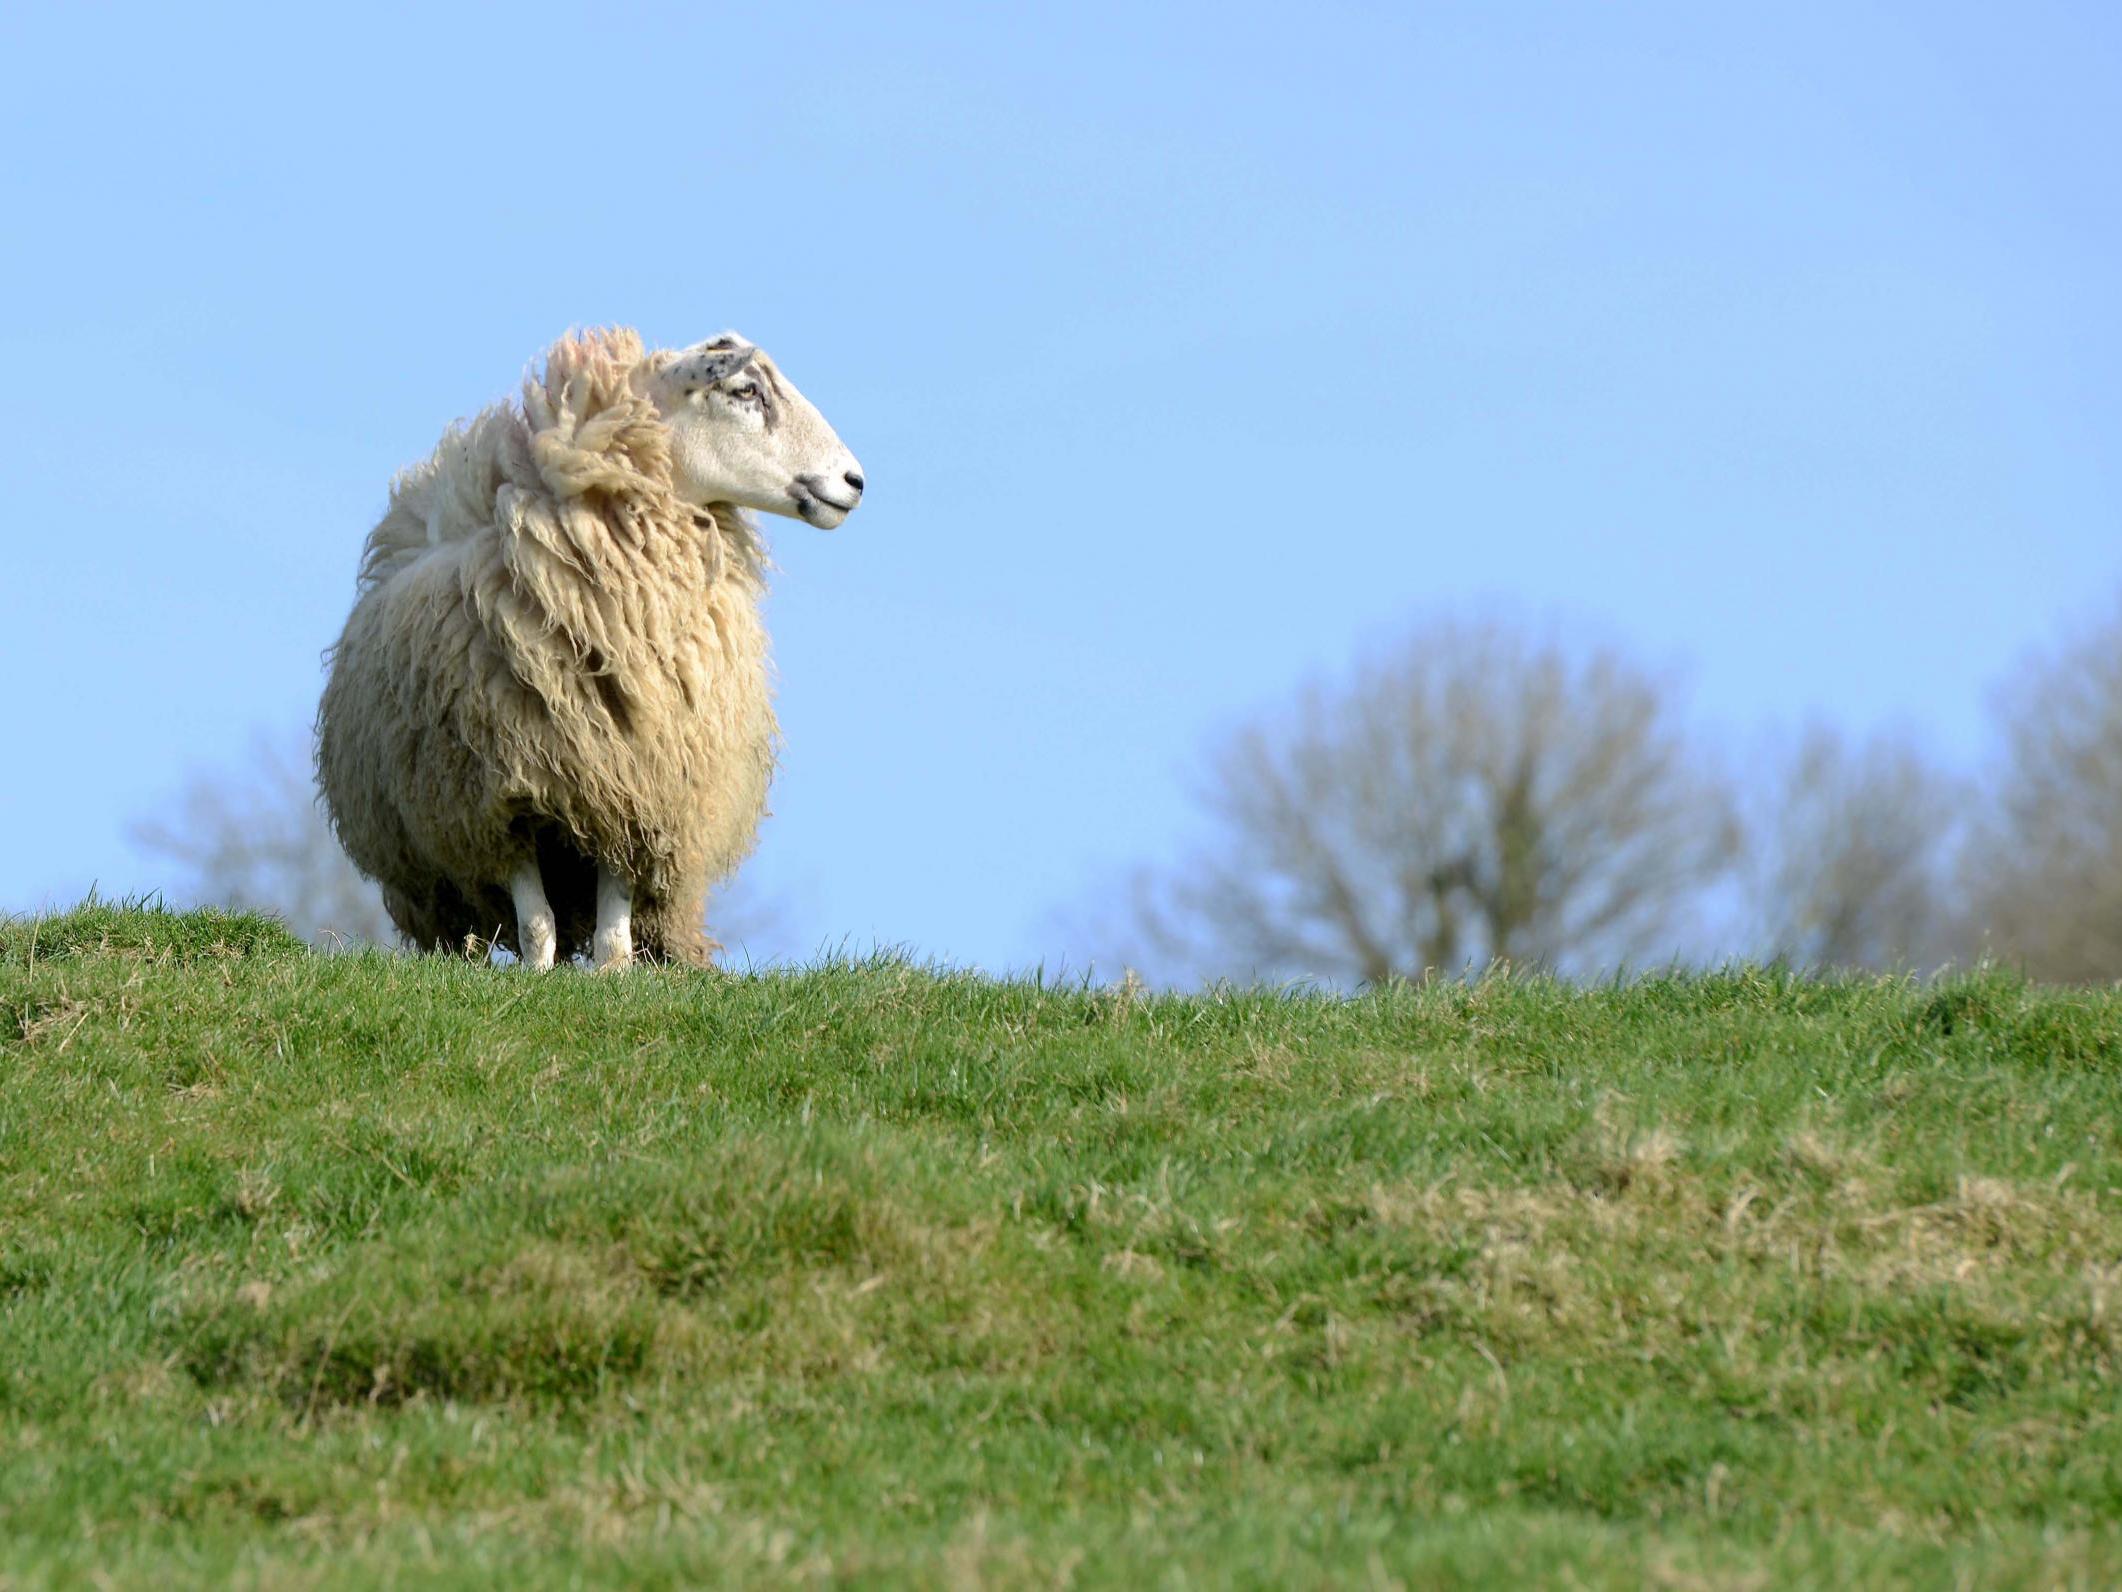 The animals are ‘the principal obstacle standing in the way of meaningful nature recovery in Britain’s national parks’